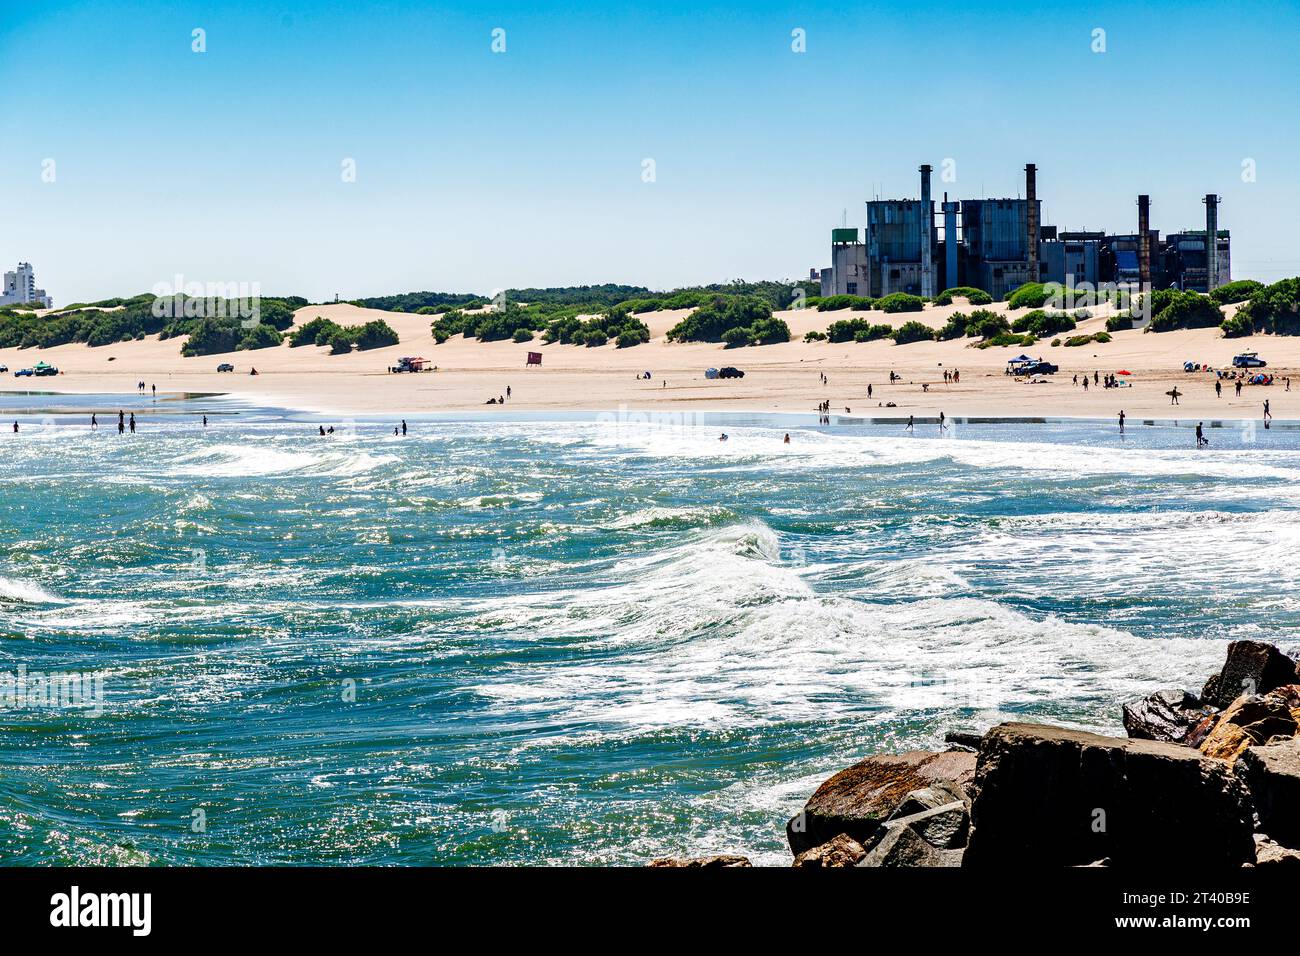 Necochea city, Buenos Aires, Argentina. View of the town skyline and the beach from the harbor pier. Stock Photo